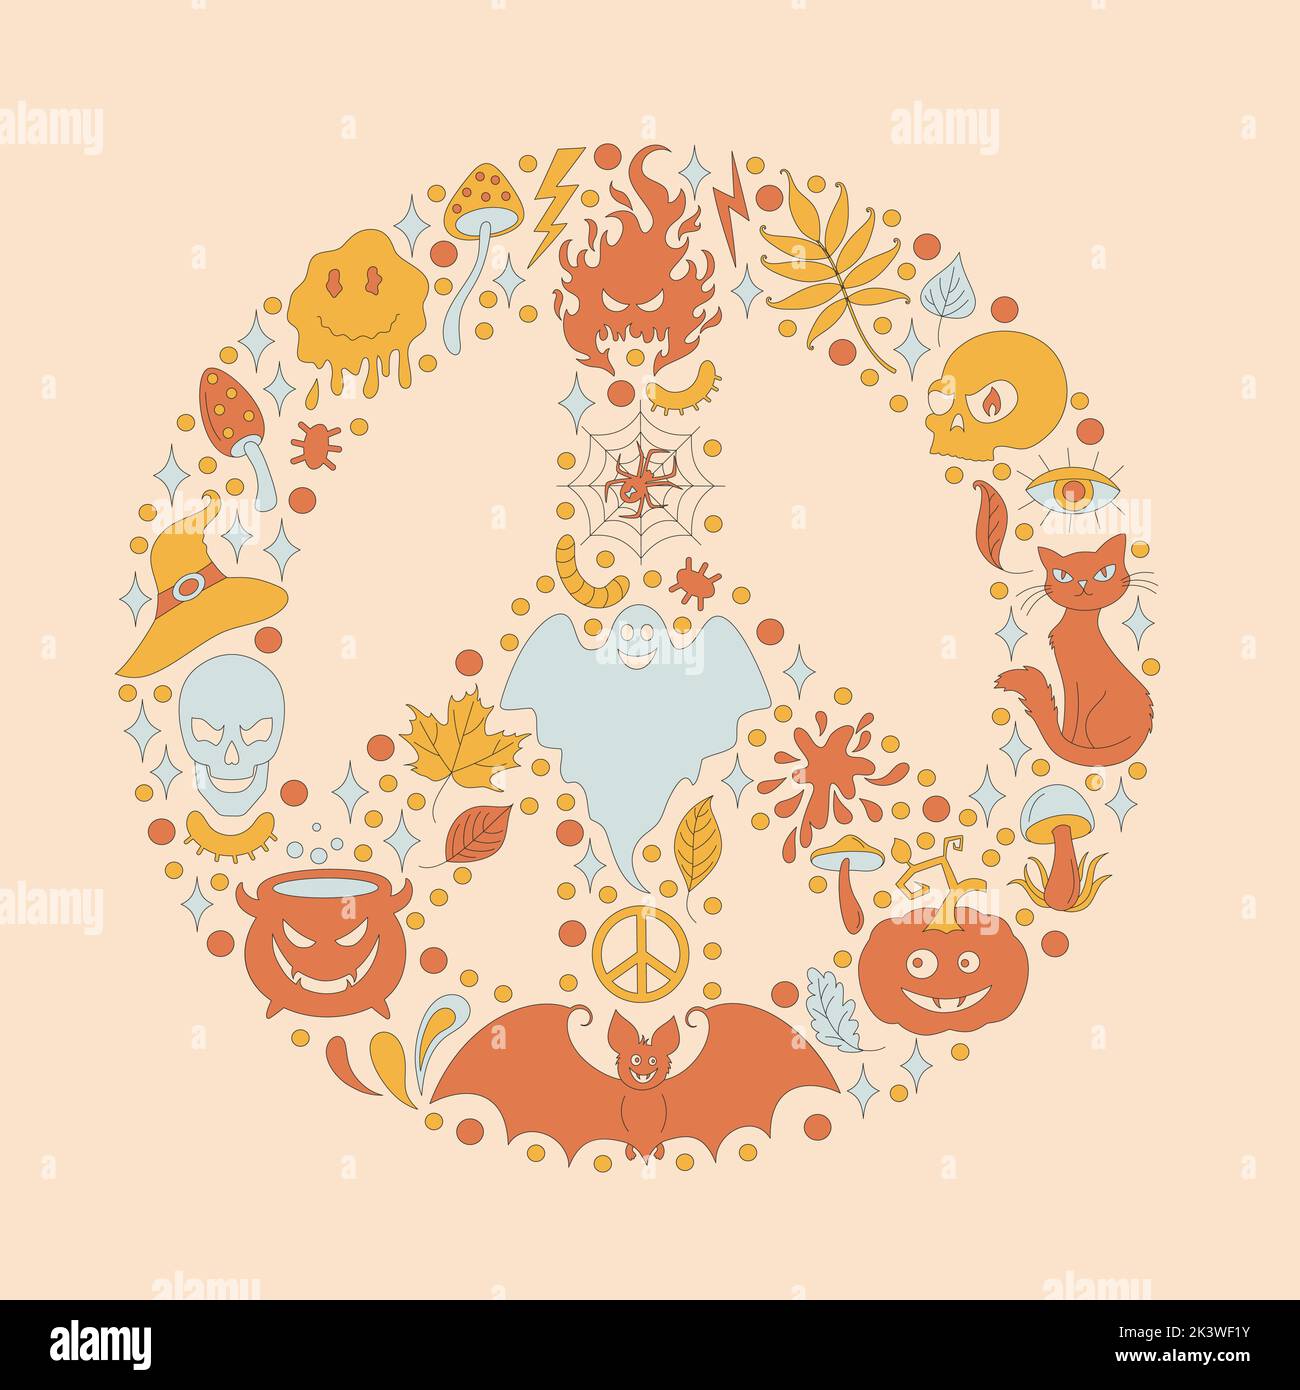 Retro frame with 70s style Halloween elements.  Stock Vector